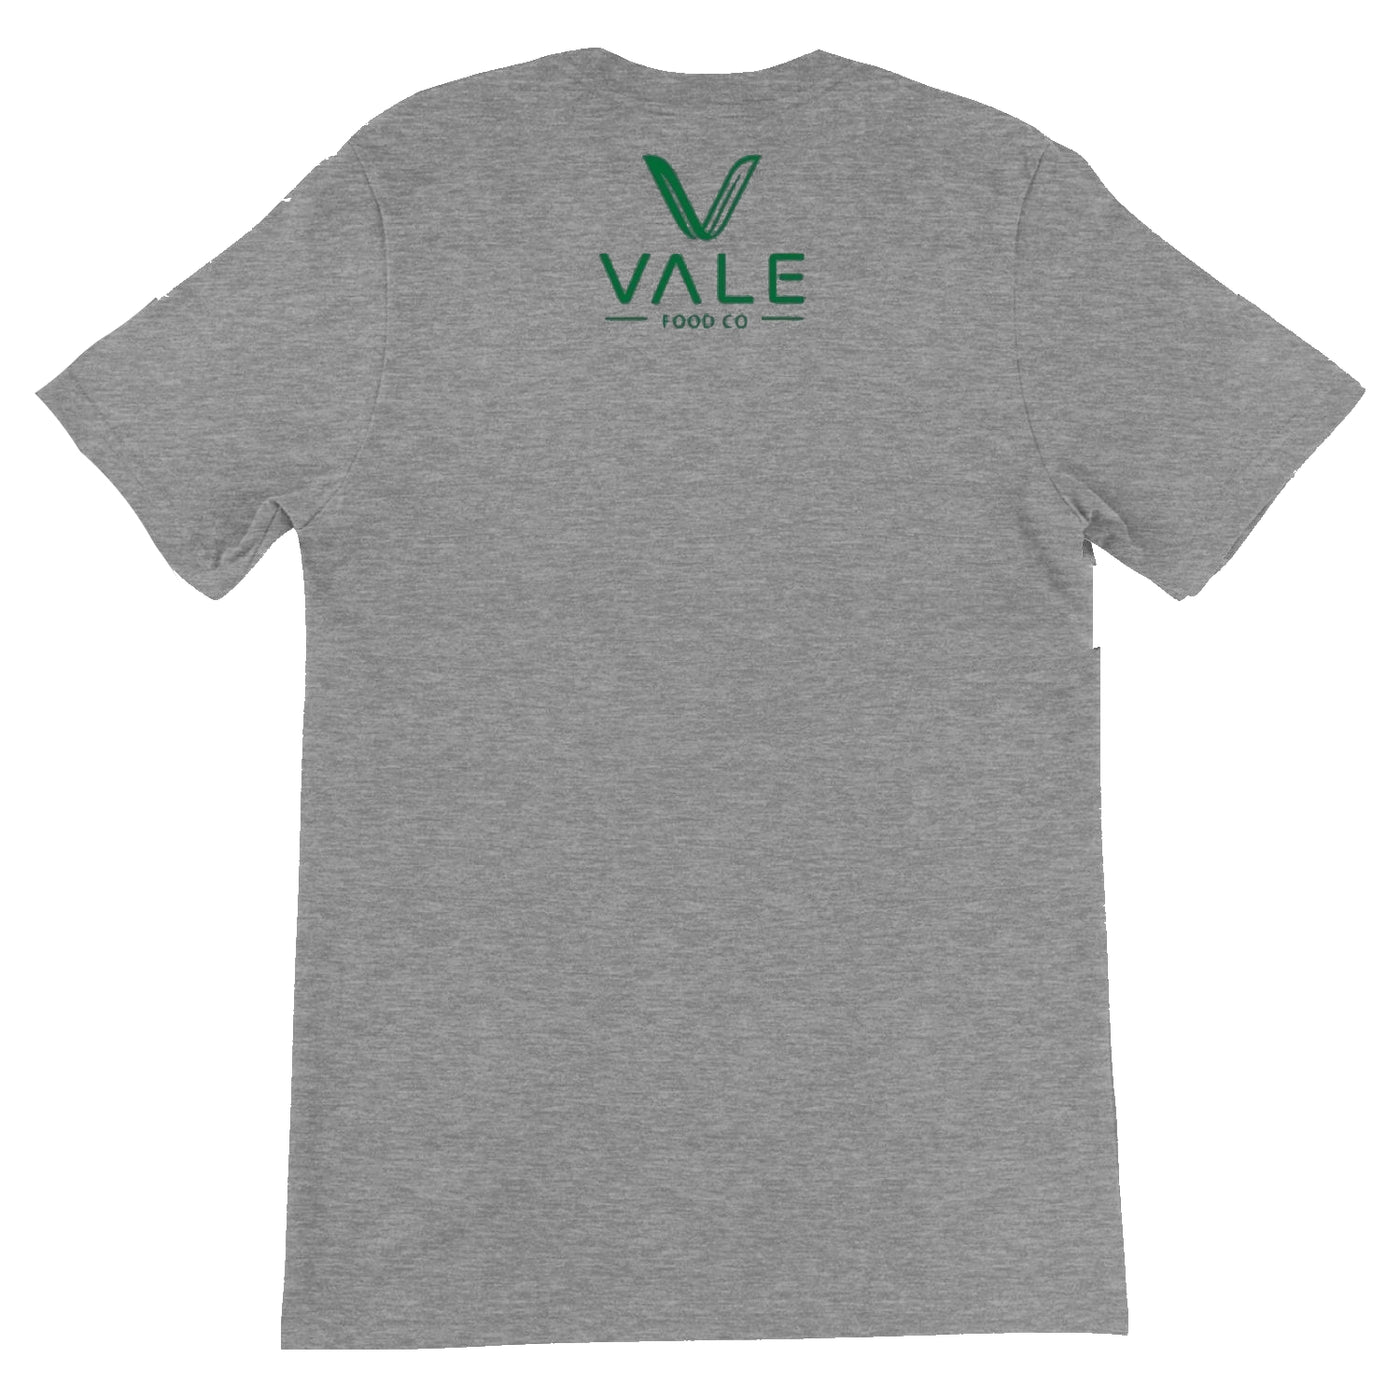 Vale 100% Natural - Unisex Jersey Tee